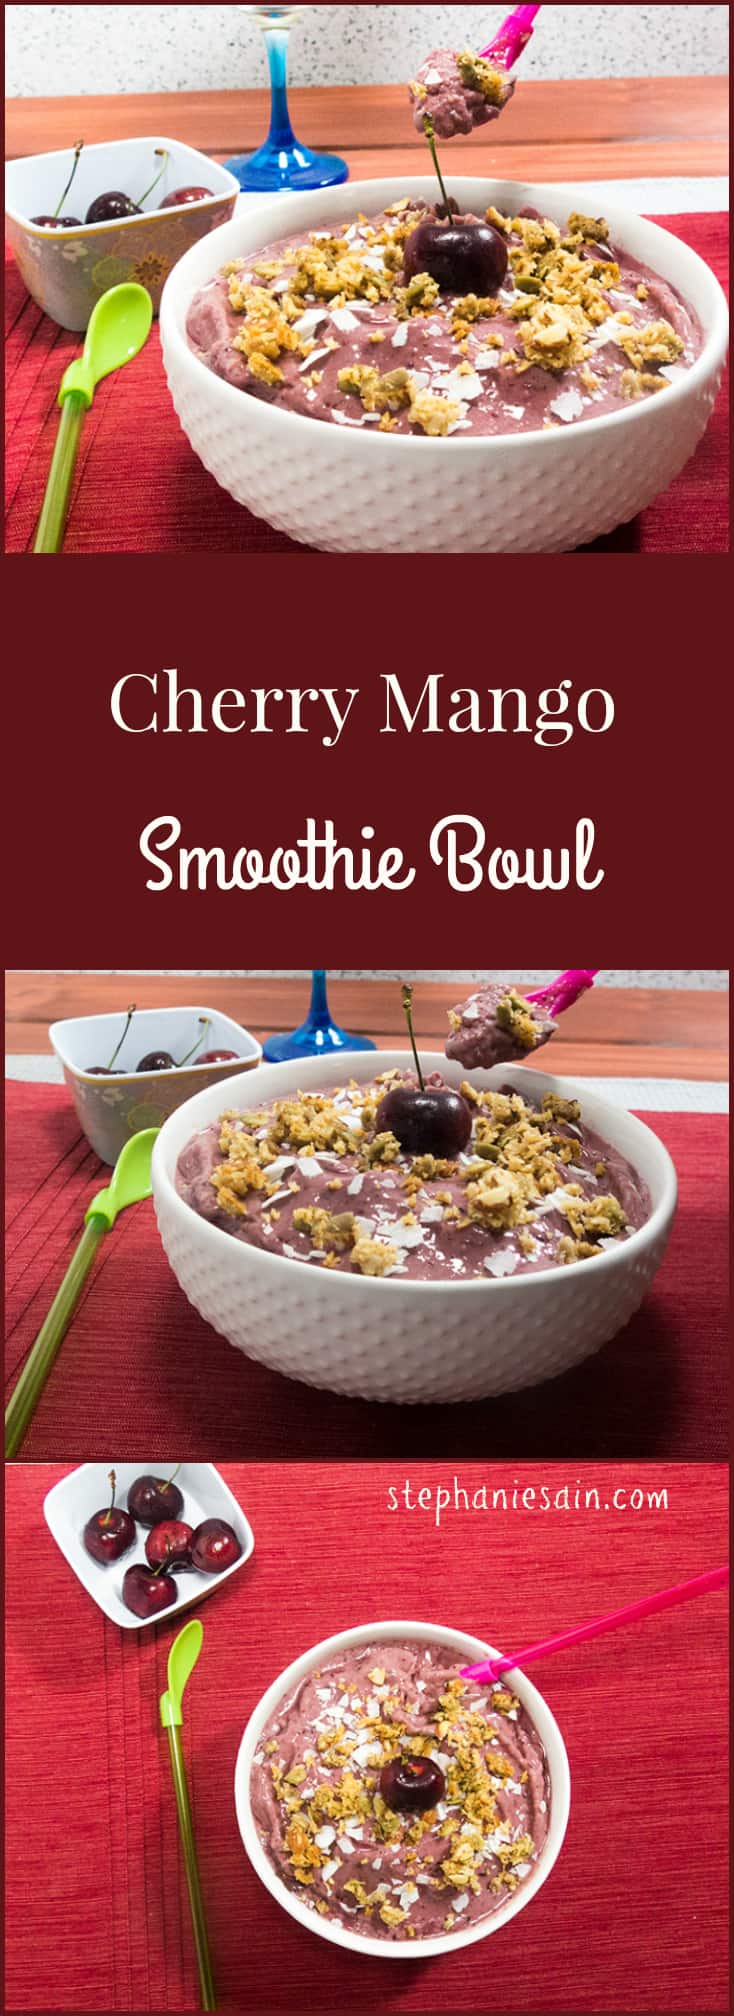 Cherry Mango Smoothie Bowl is packed with cherries and mangos for the perfect breakfast or snack. Toppings customizable.